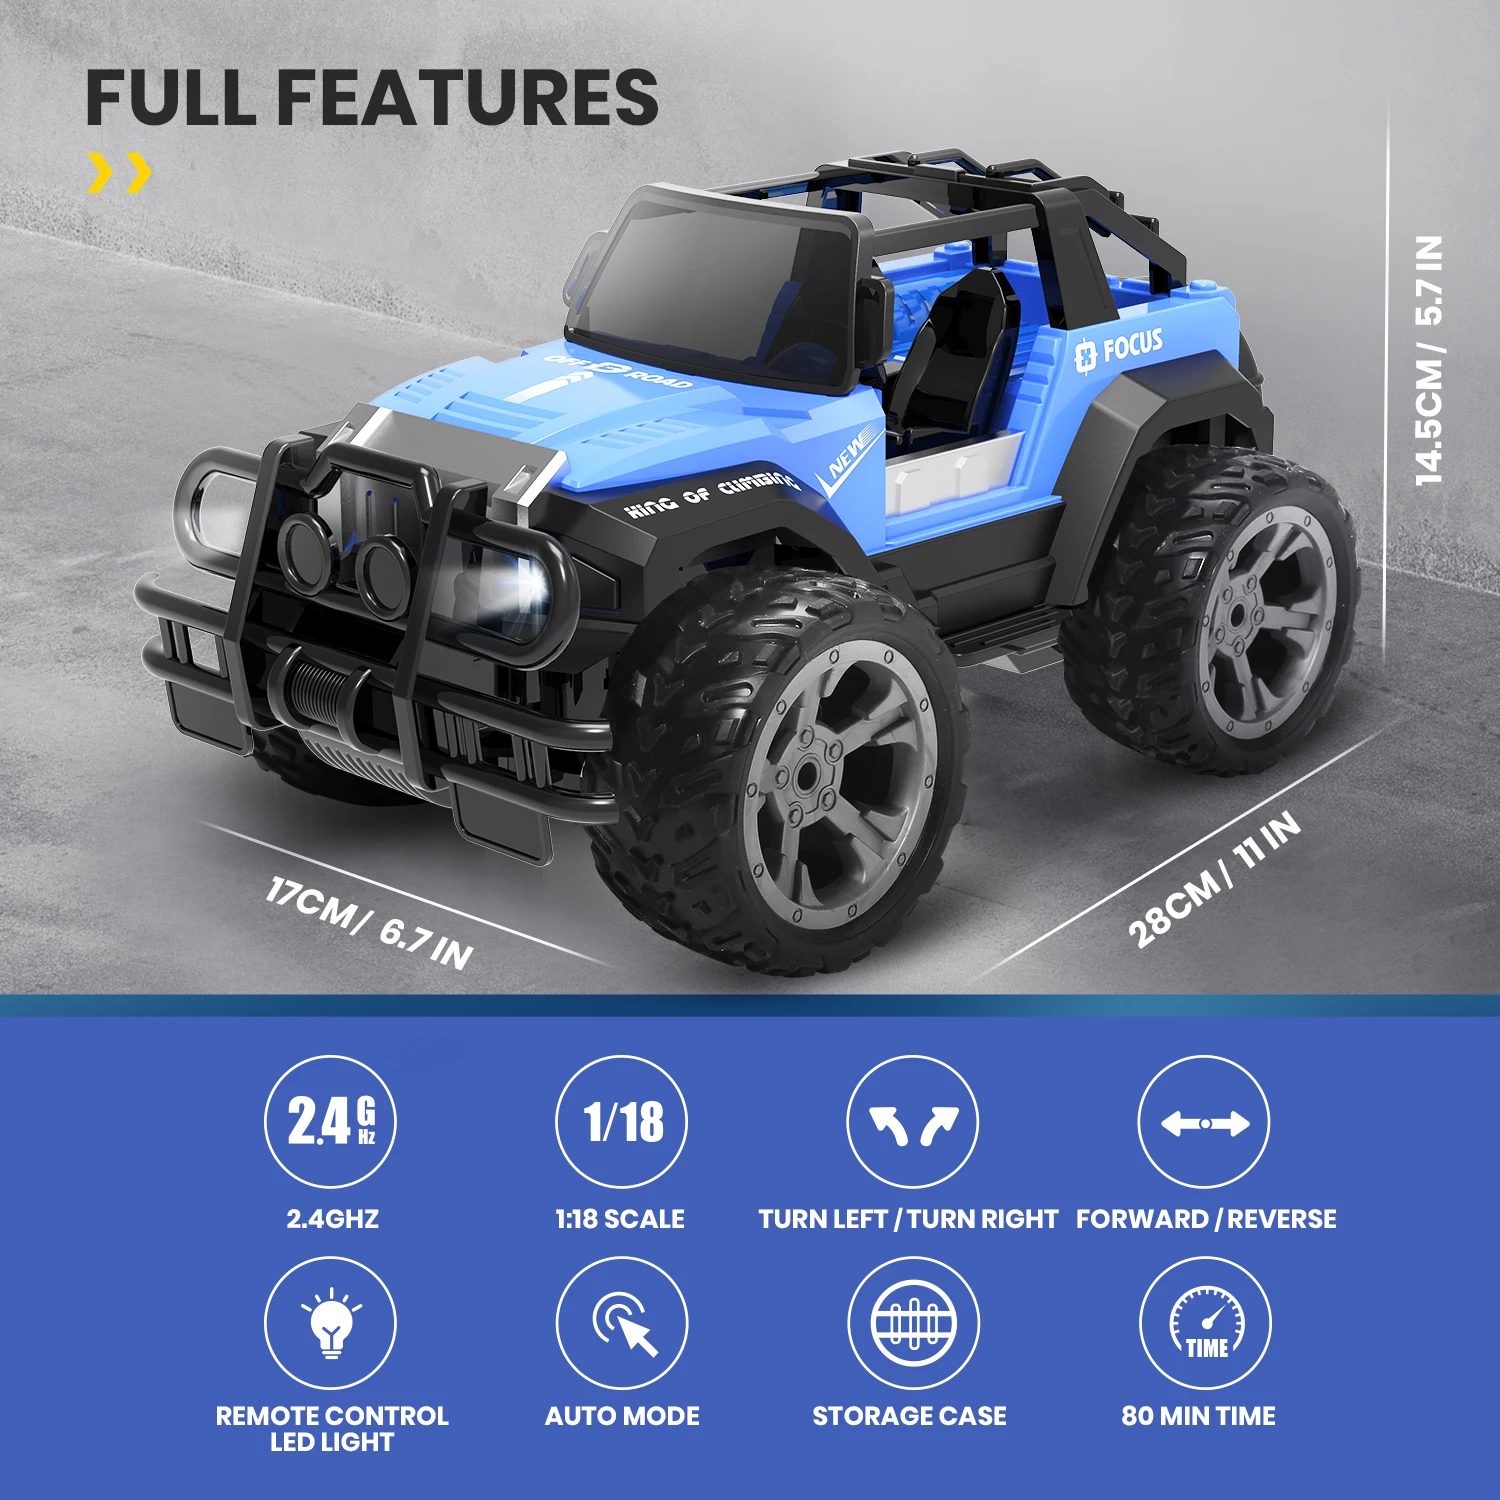 DE42 Remote Control Car Toy, RC Racing Cars with 80 Min Play Time for Kids, 1:18 Scale 2.4Ghz Off-Road RC Trucks with LED enlarge